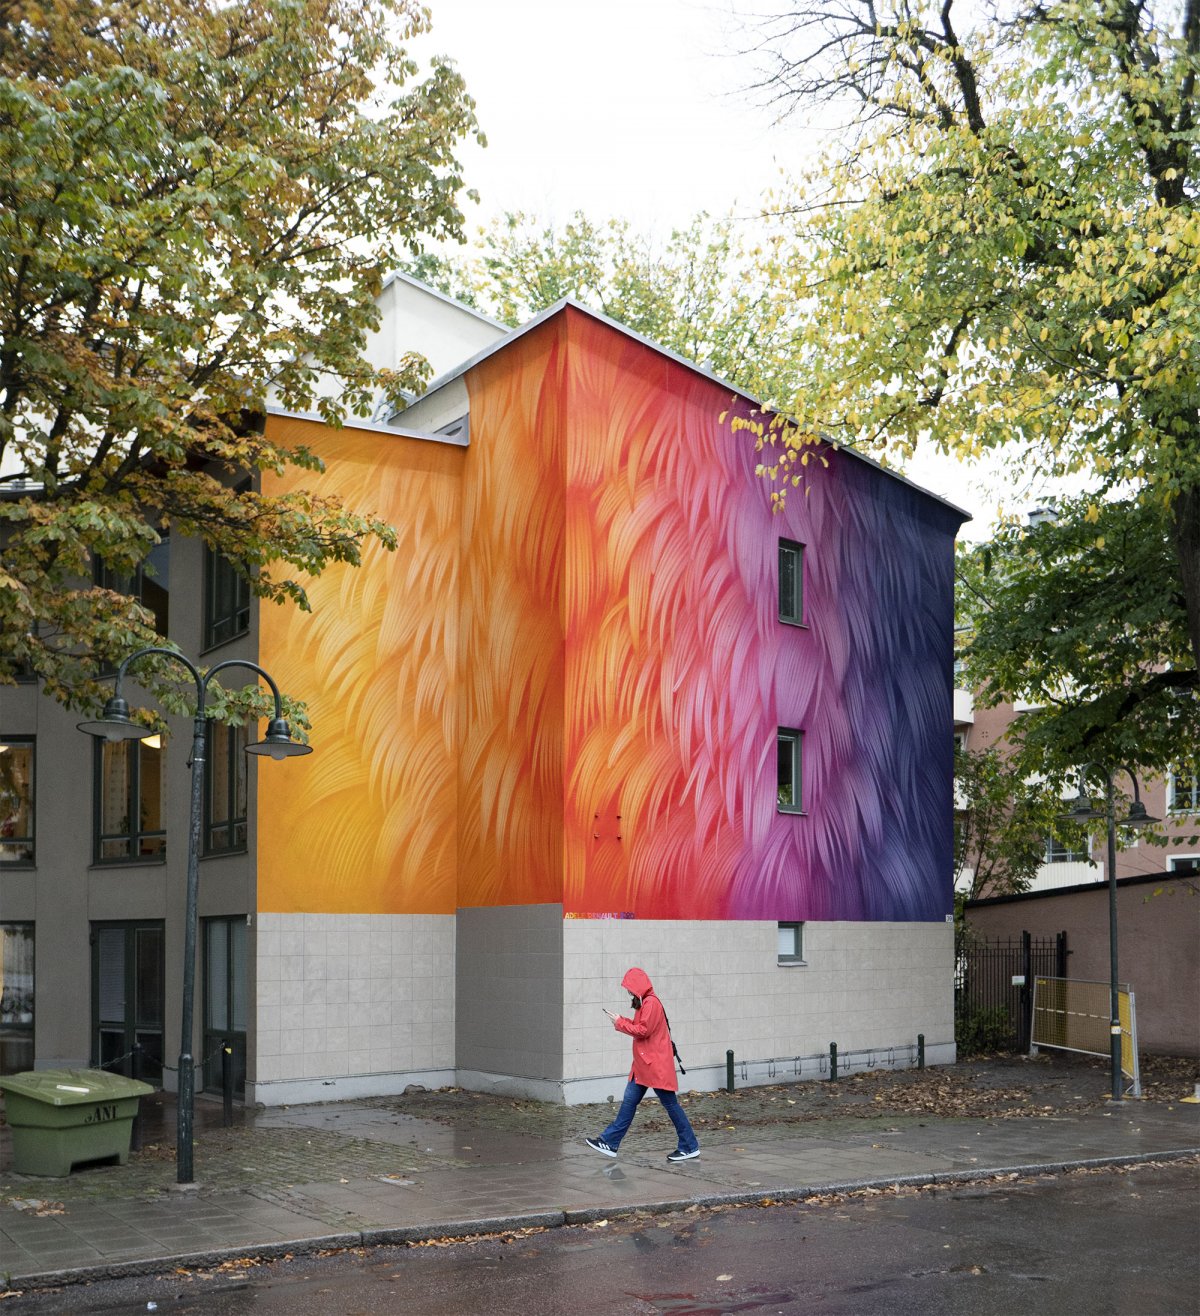 Vibrant murals of colored feathers by Adele Renault